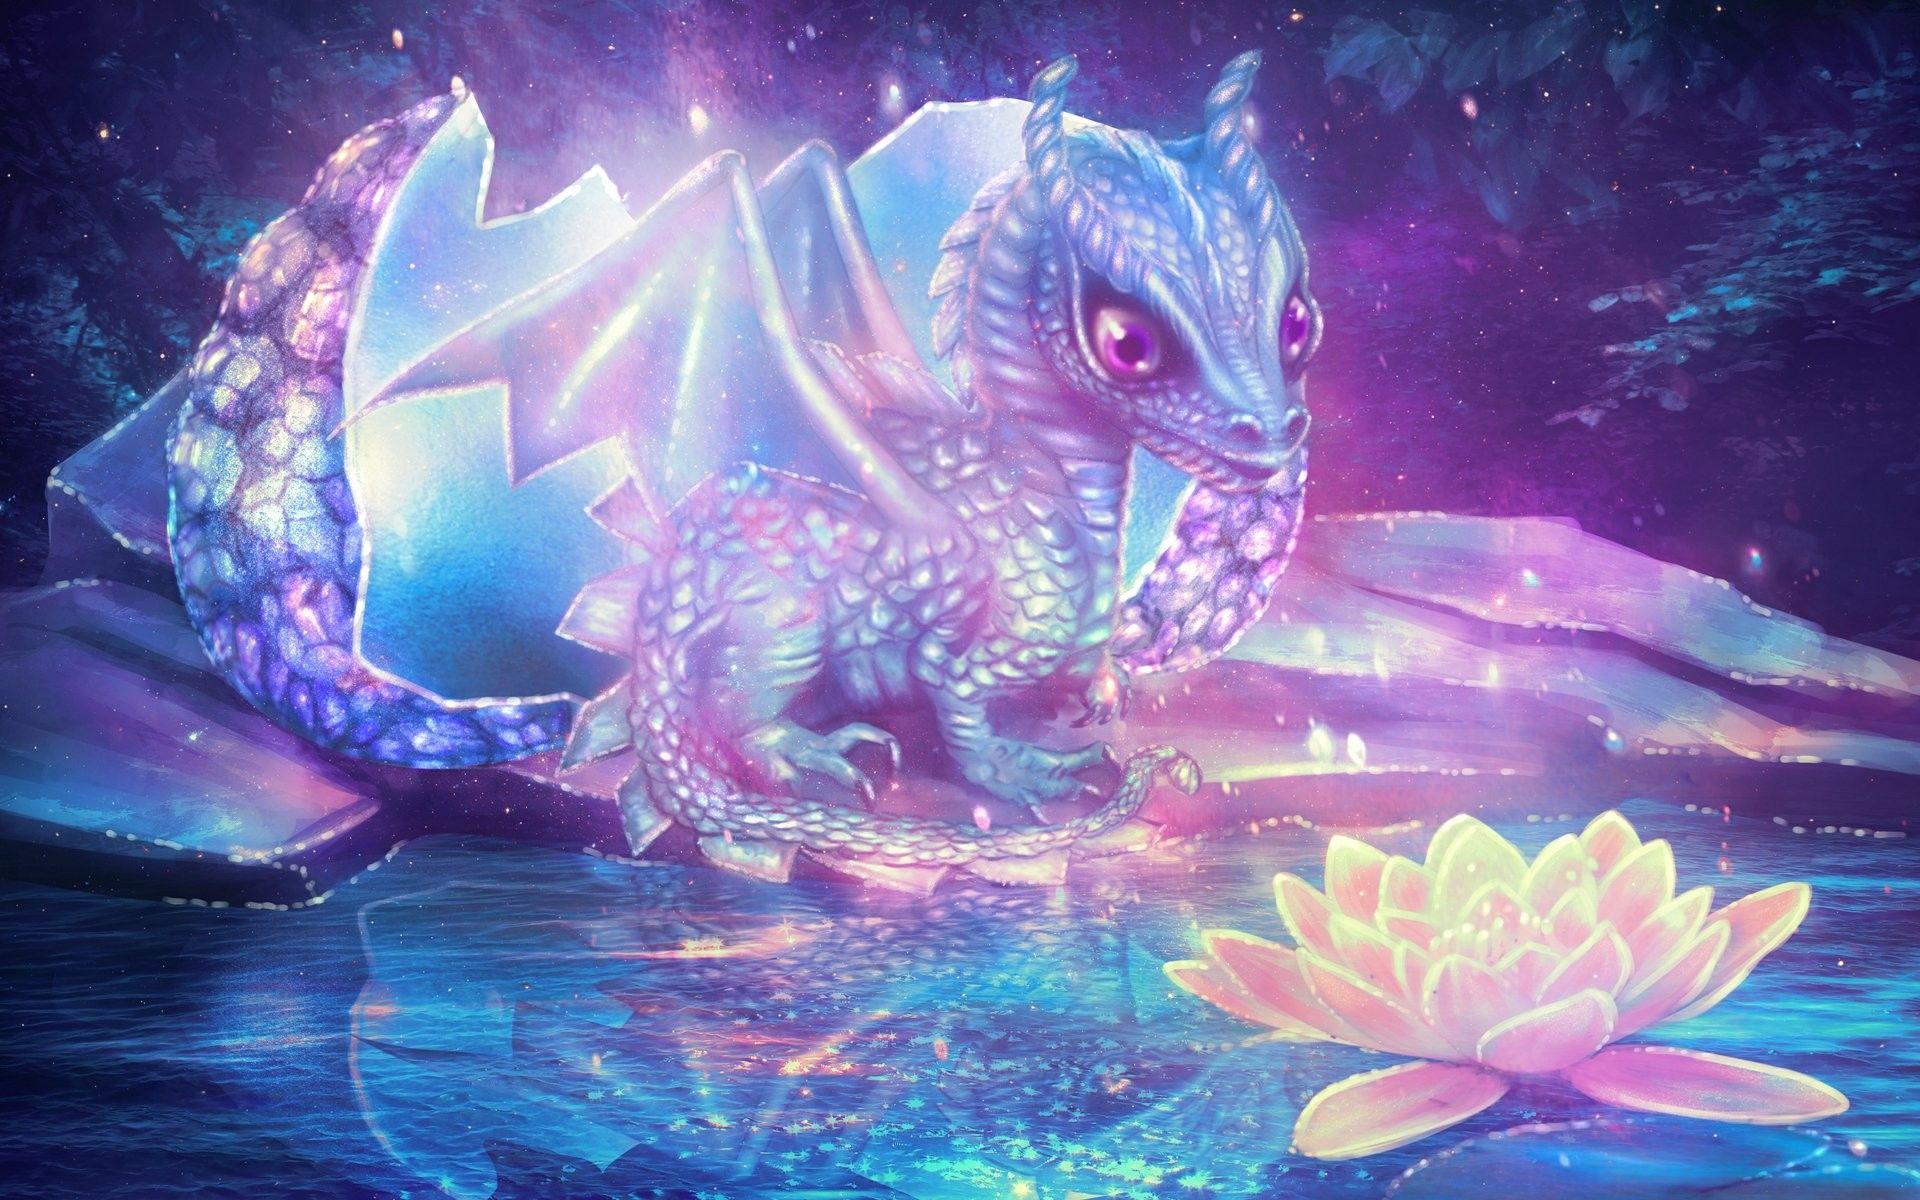 High Resolution Purple Dragons Wallpapers - Top Free High Resolution ...